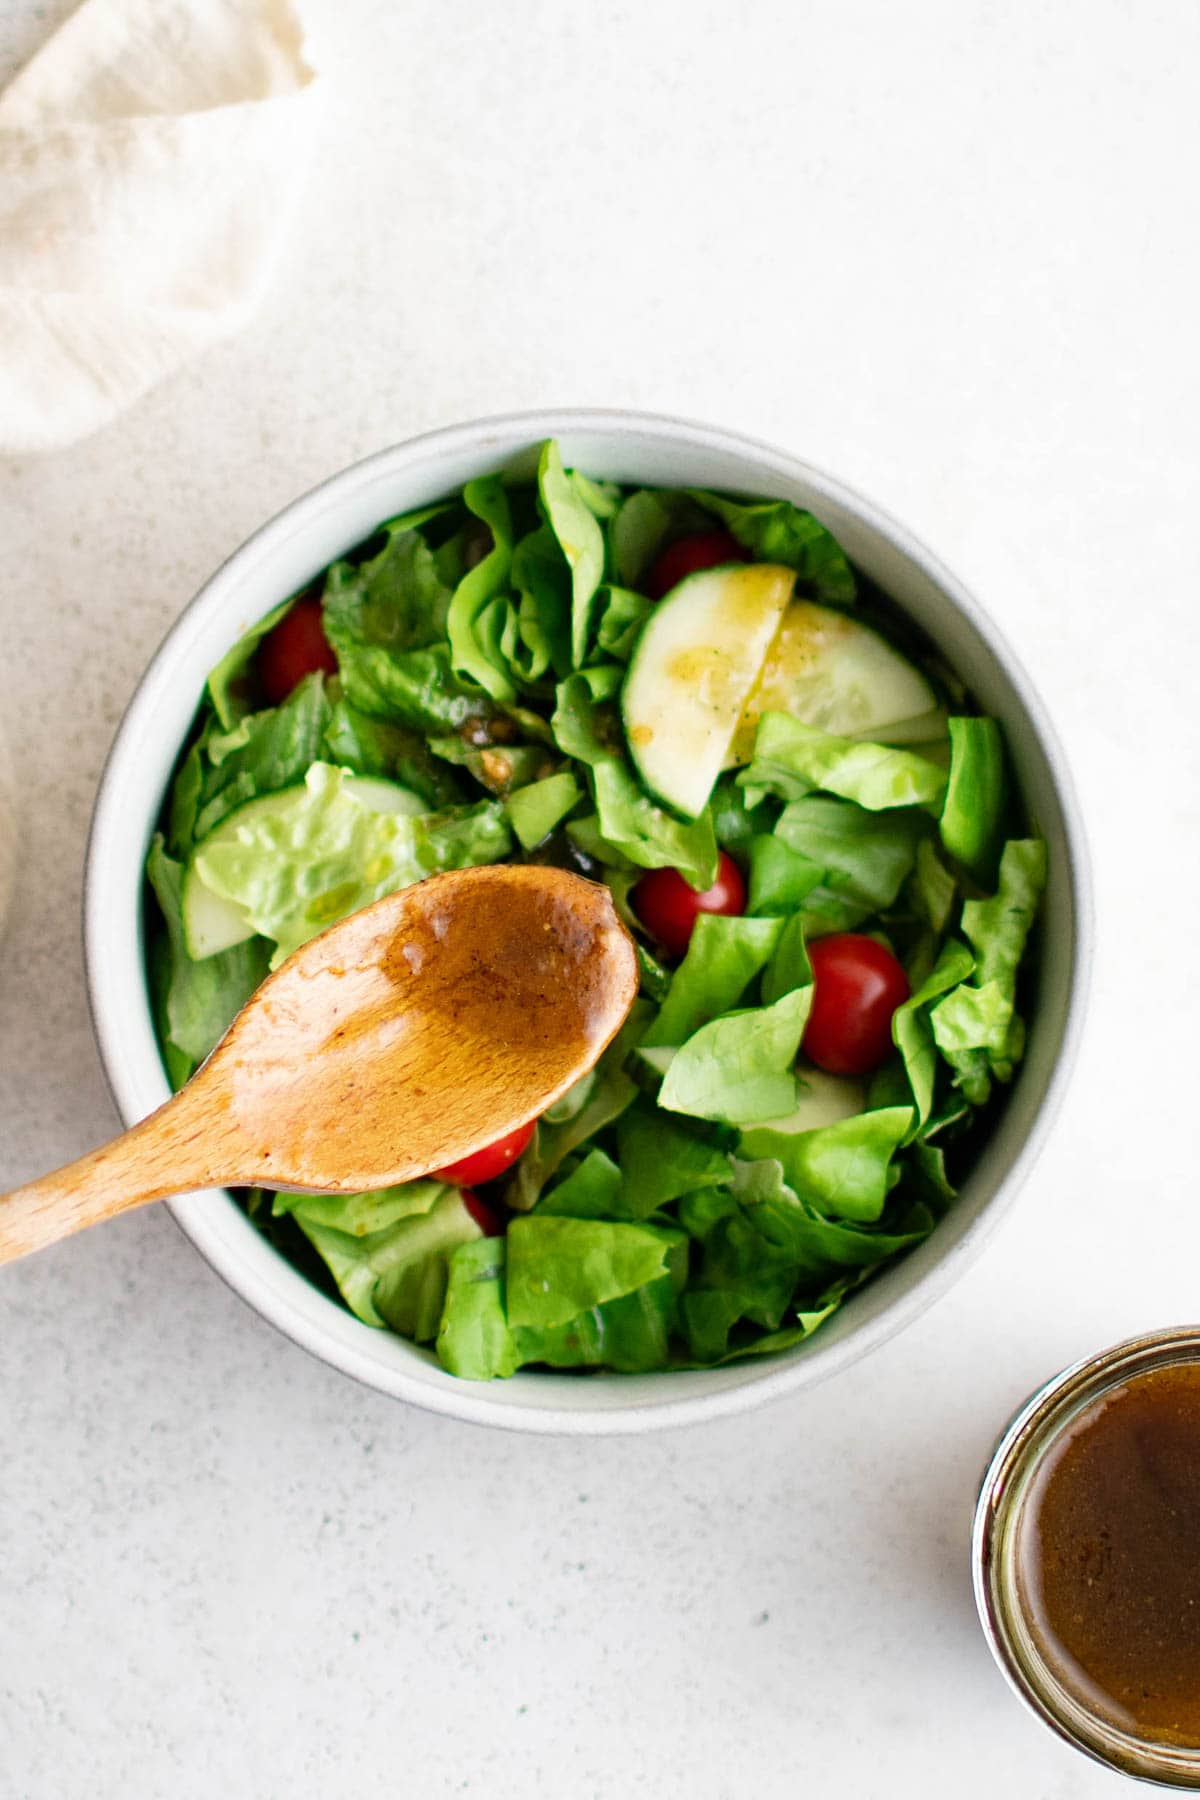 Salad in a white bowl with a wooden spoon and a little bit of vinaigrette dressing.